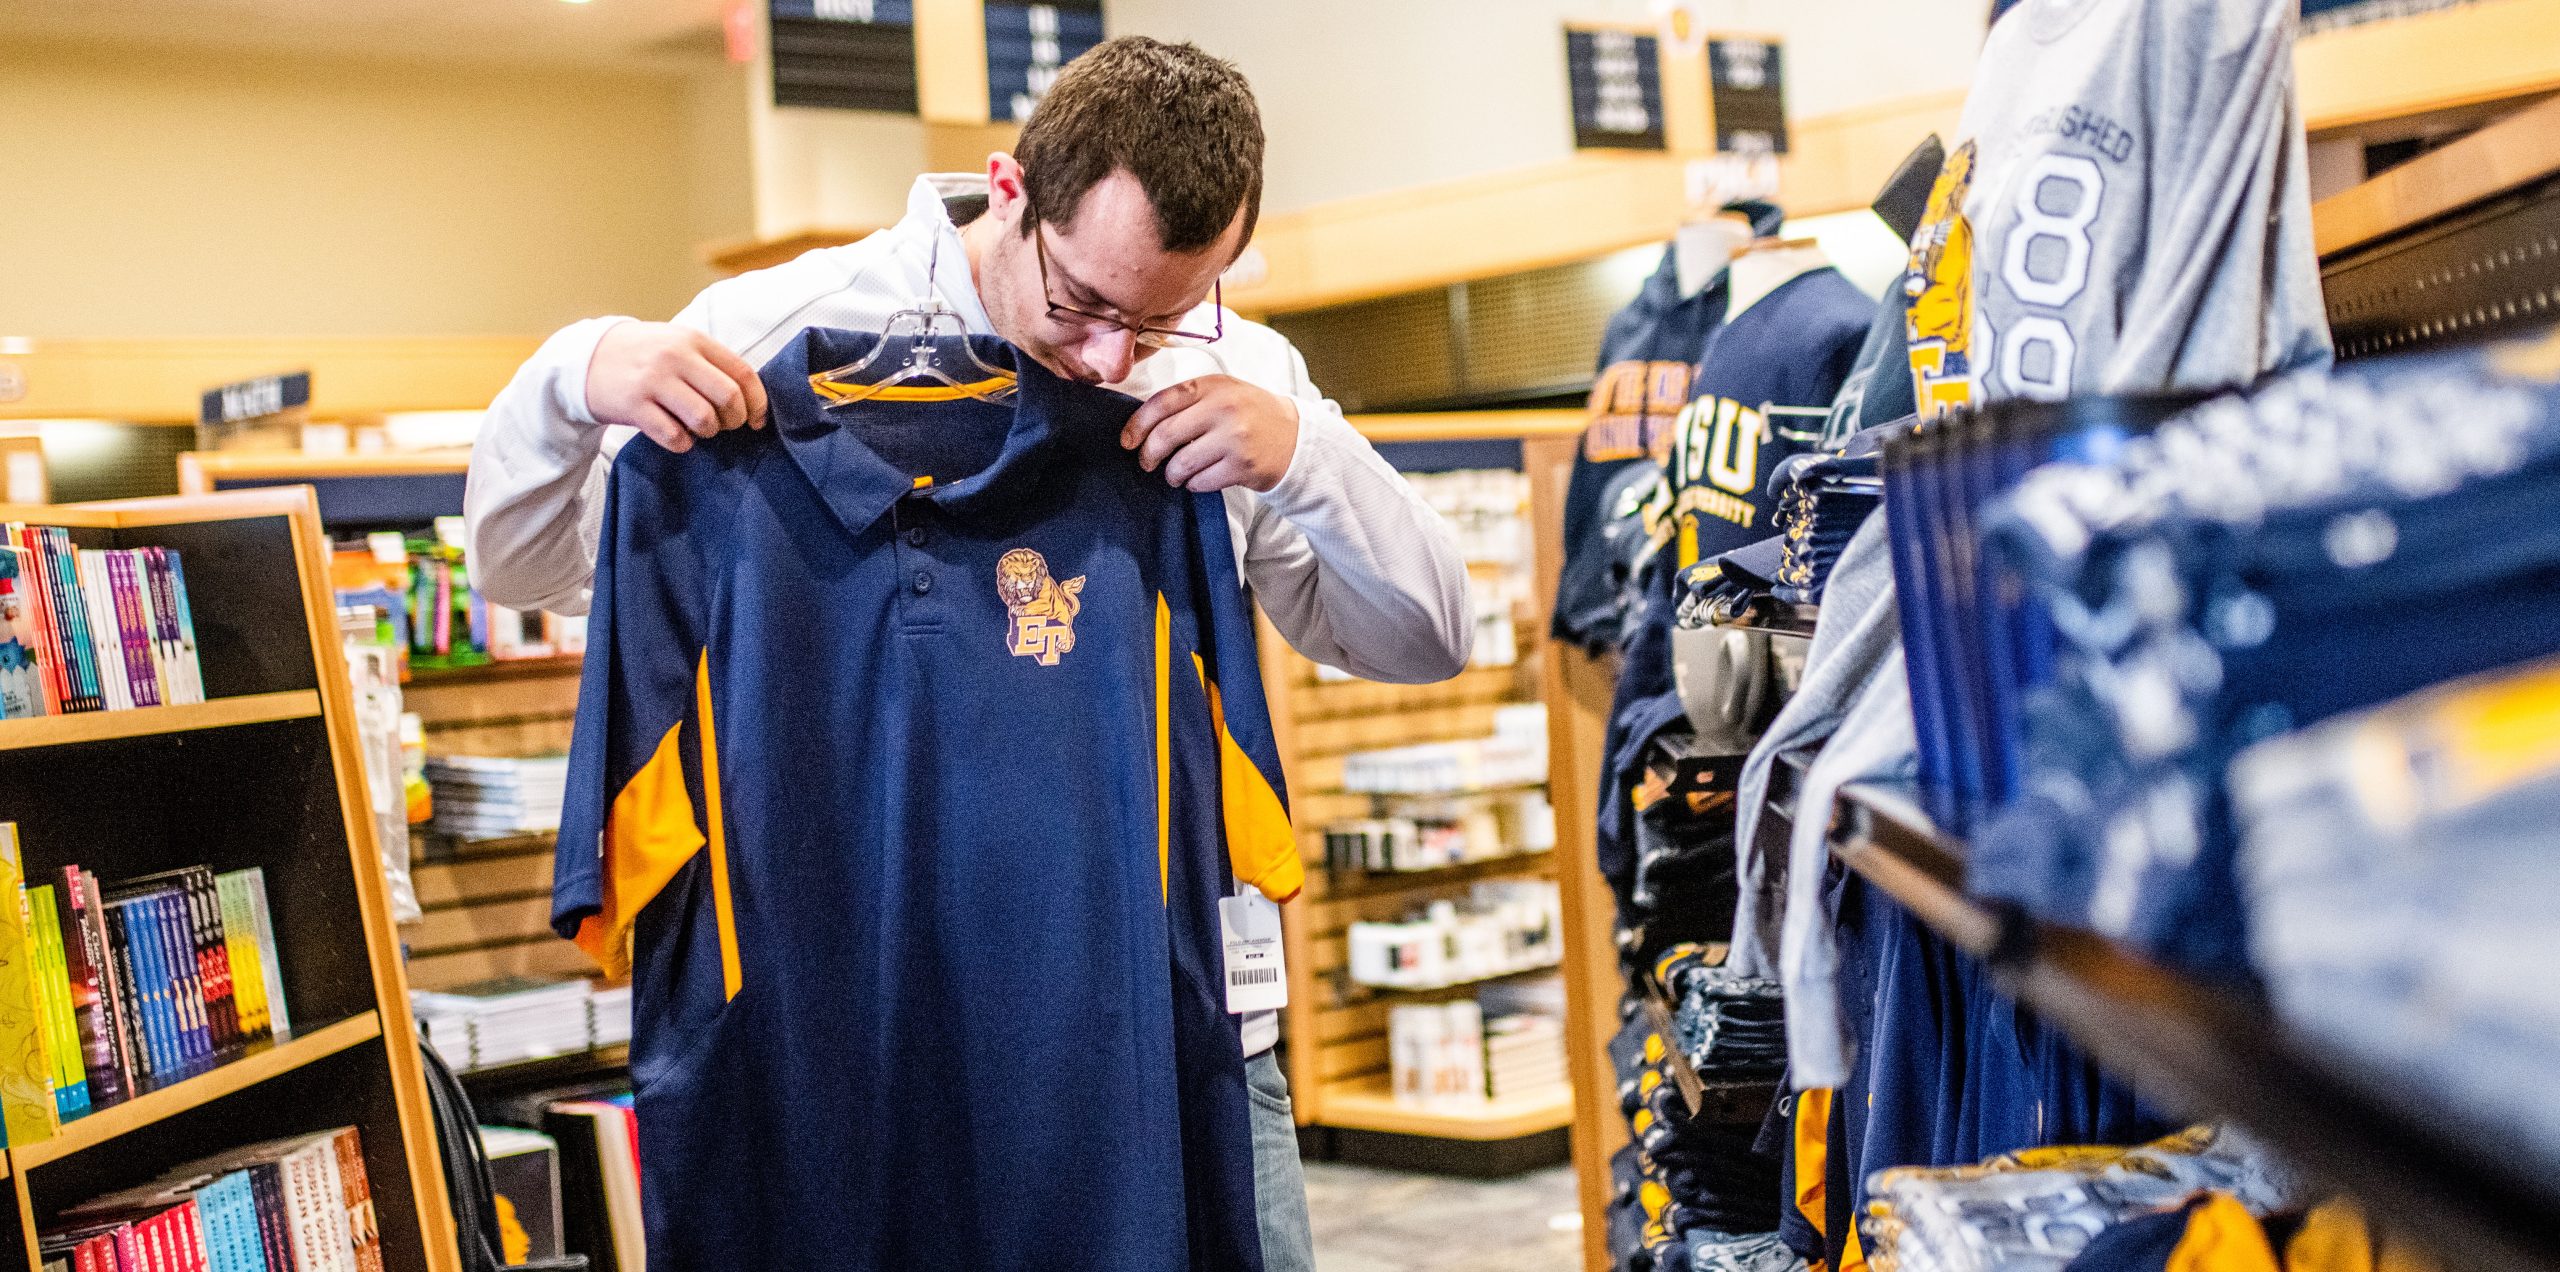 A male student looking at a A&M-Commerce t-shirt.